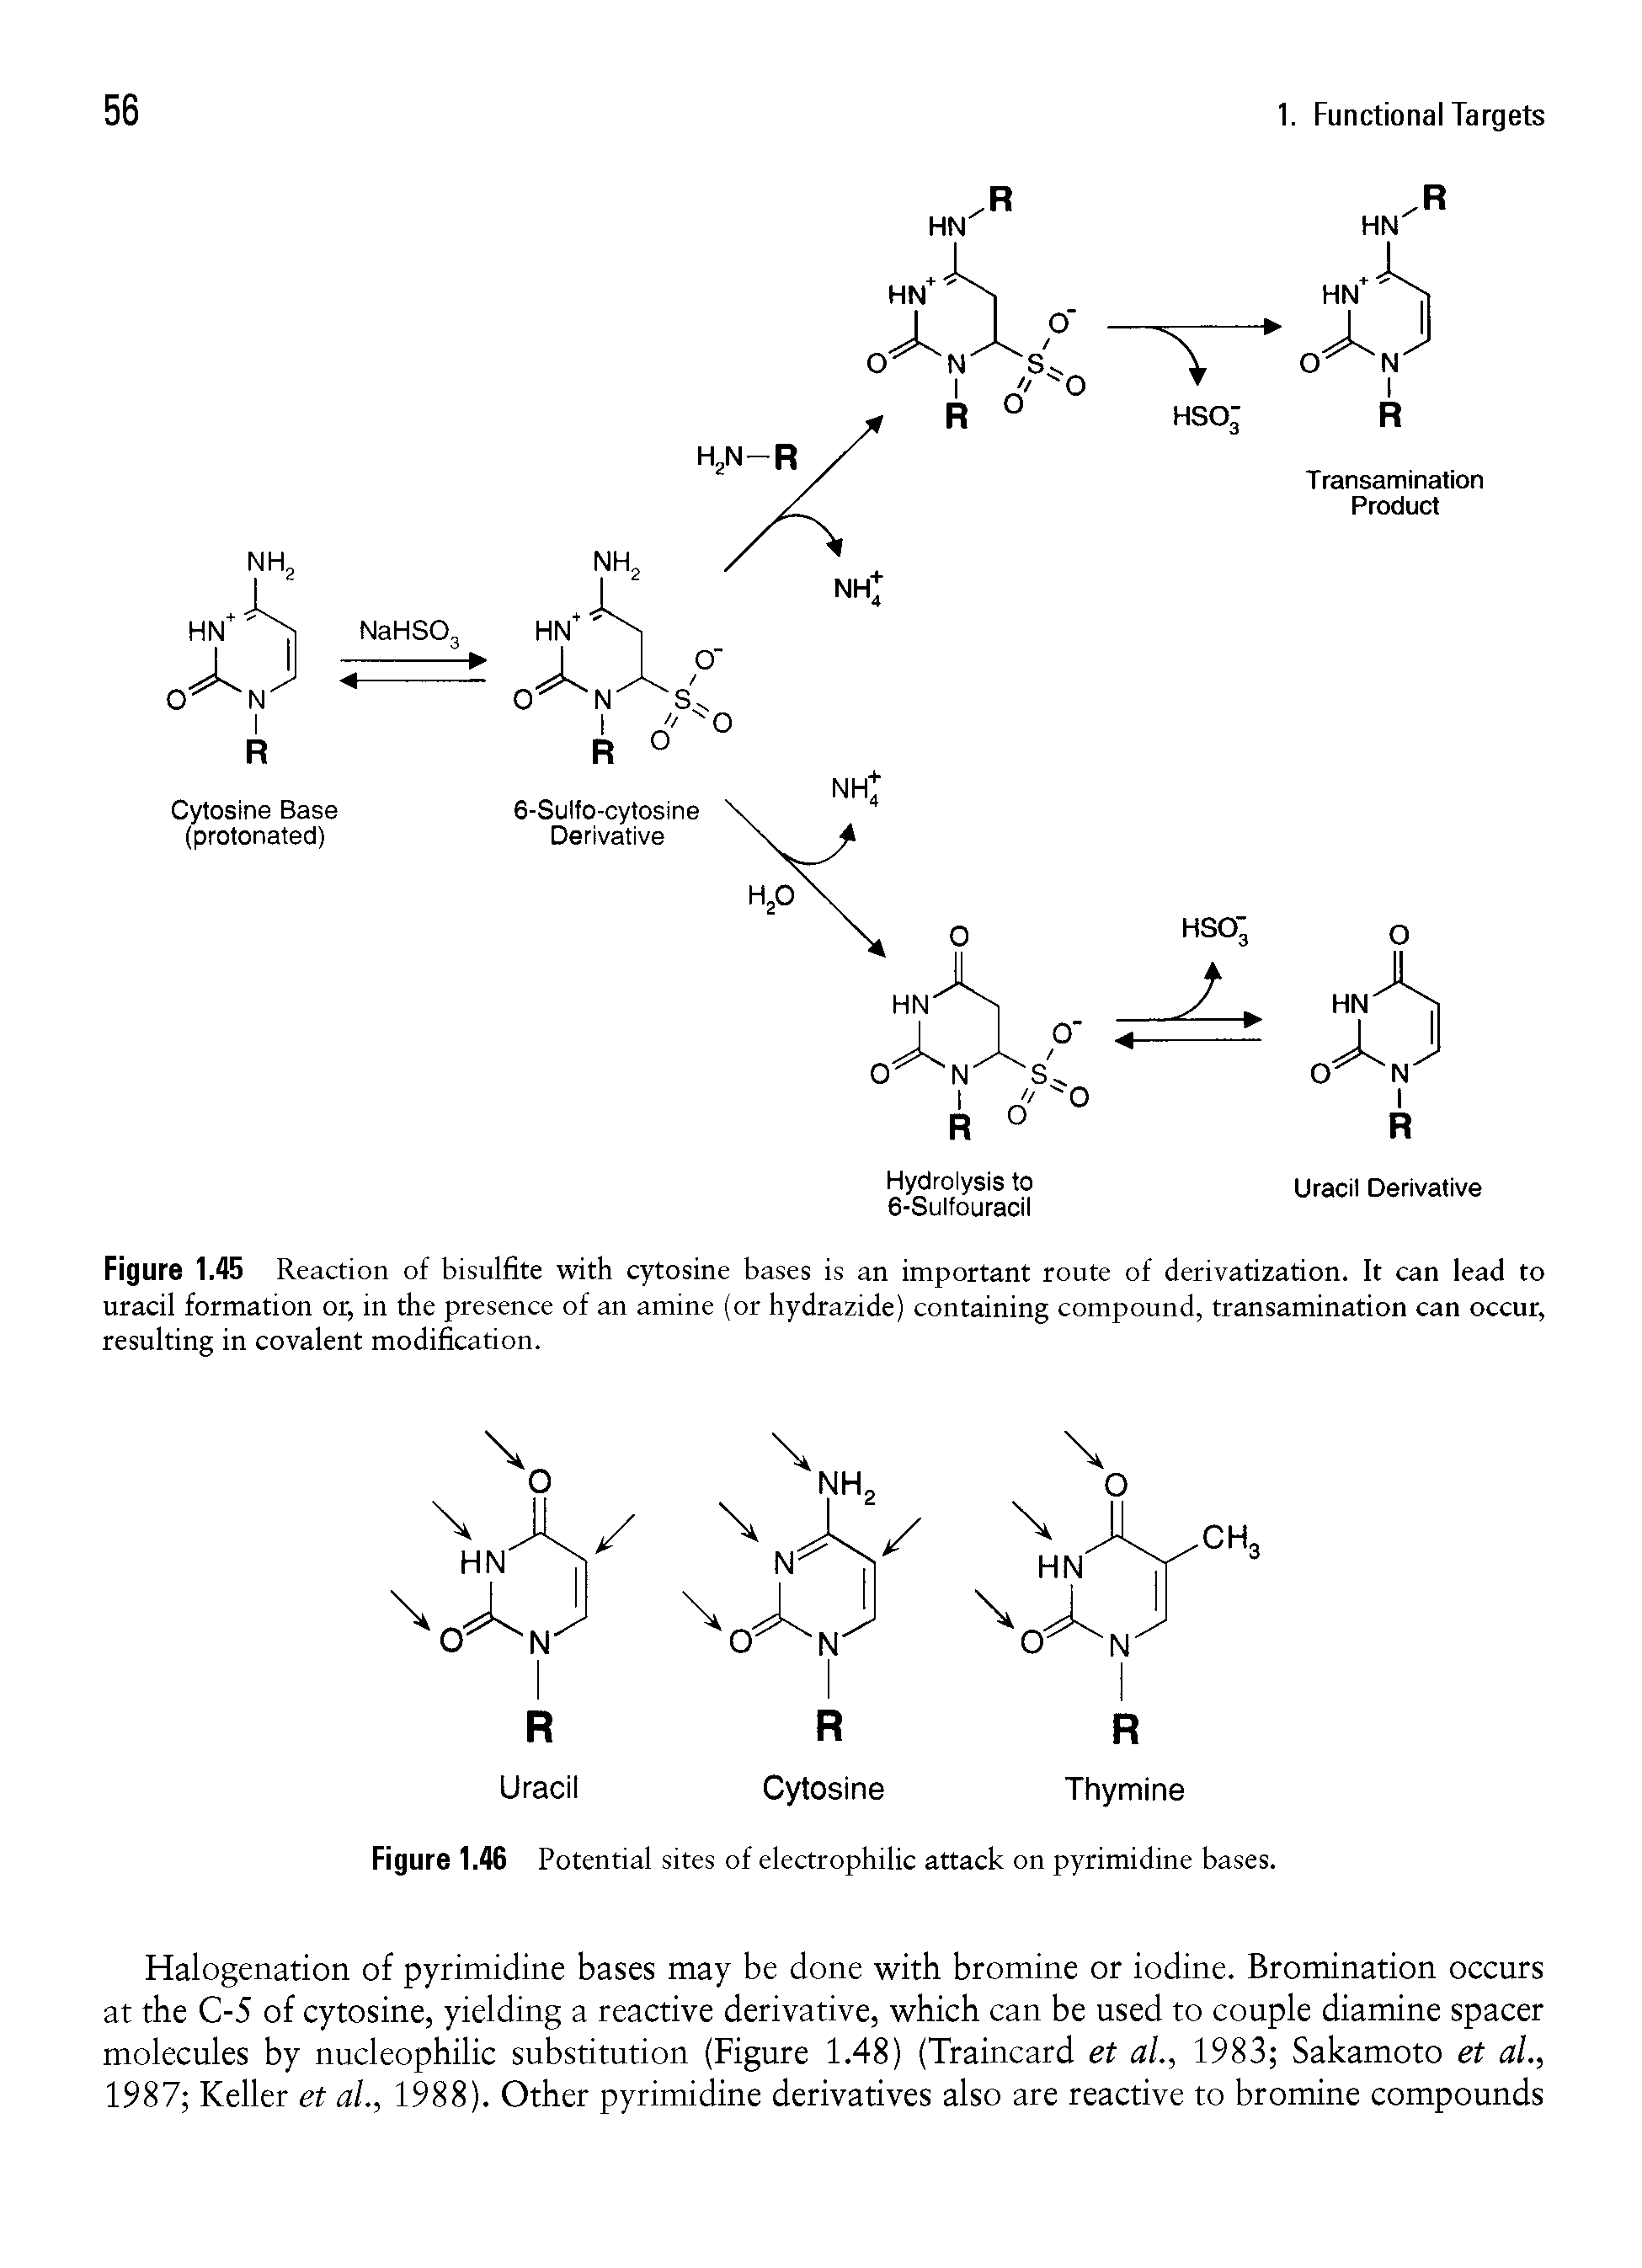 Figure 1.45 Reaction of bisulfite with cytosine bases is an important route of derivatization. It can lead to uracil formation or, in the presence of an amine (or hydrazide) containing compound, transamination can occur, resulting in covalent modification.